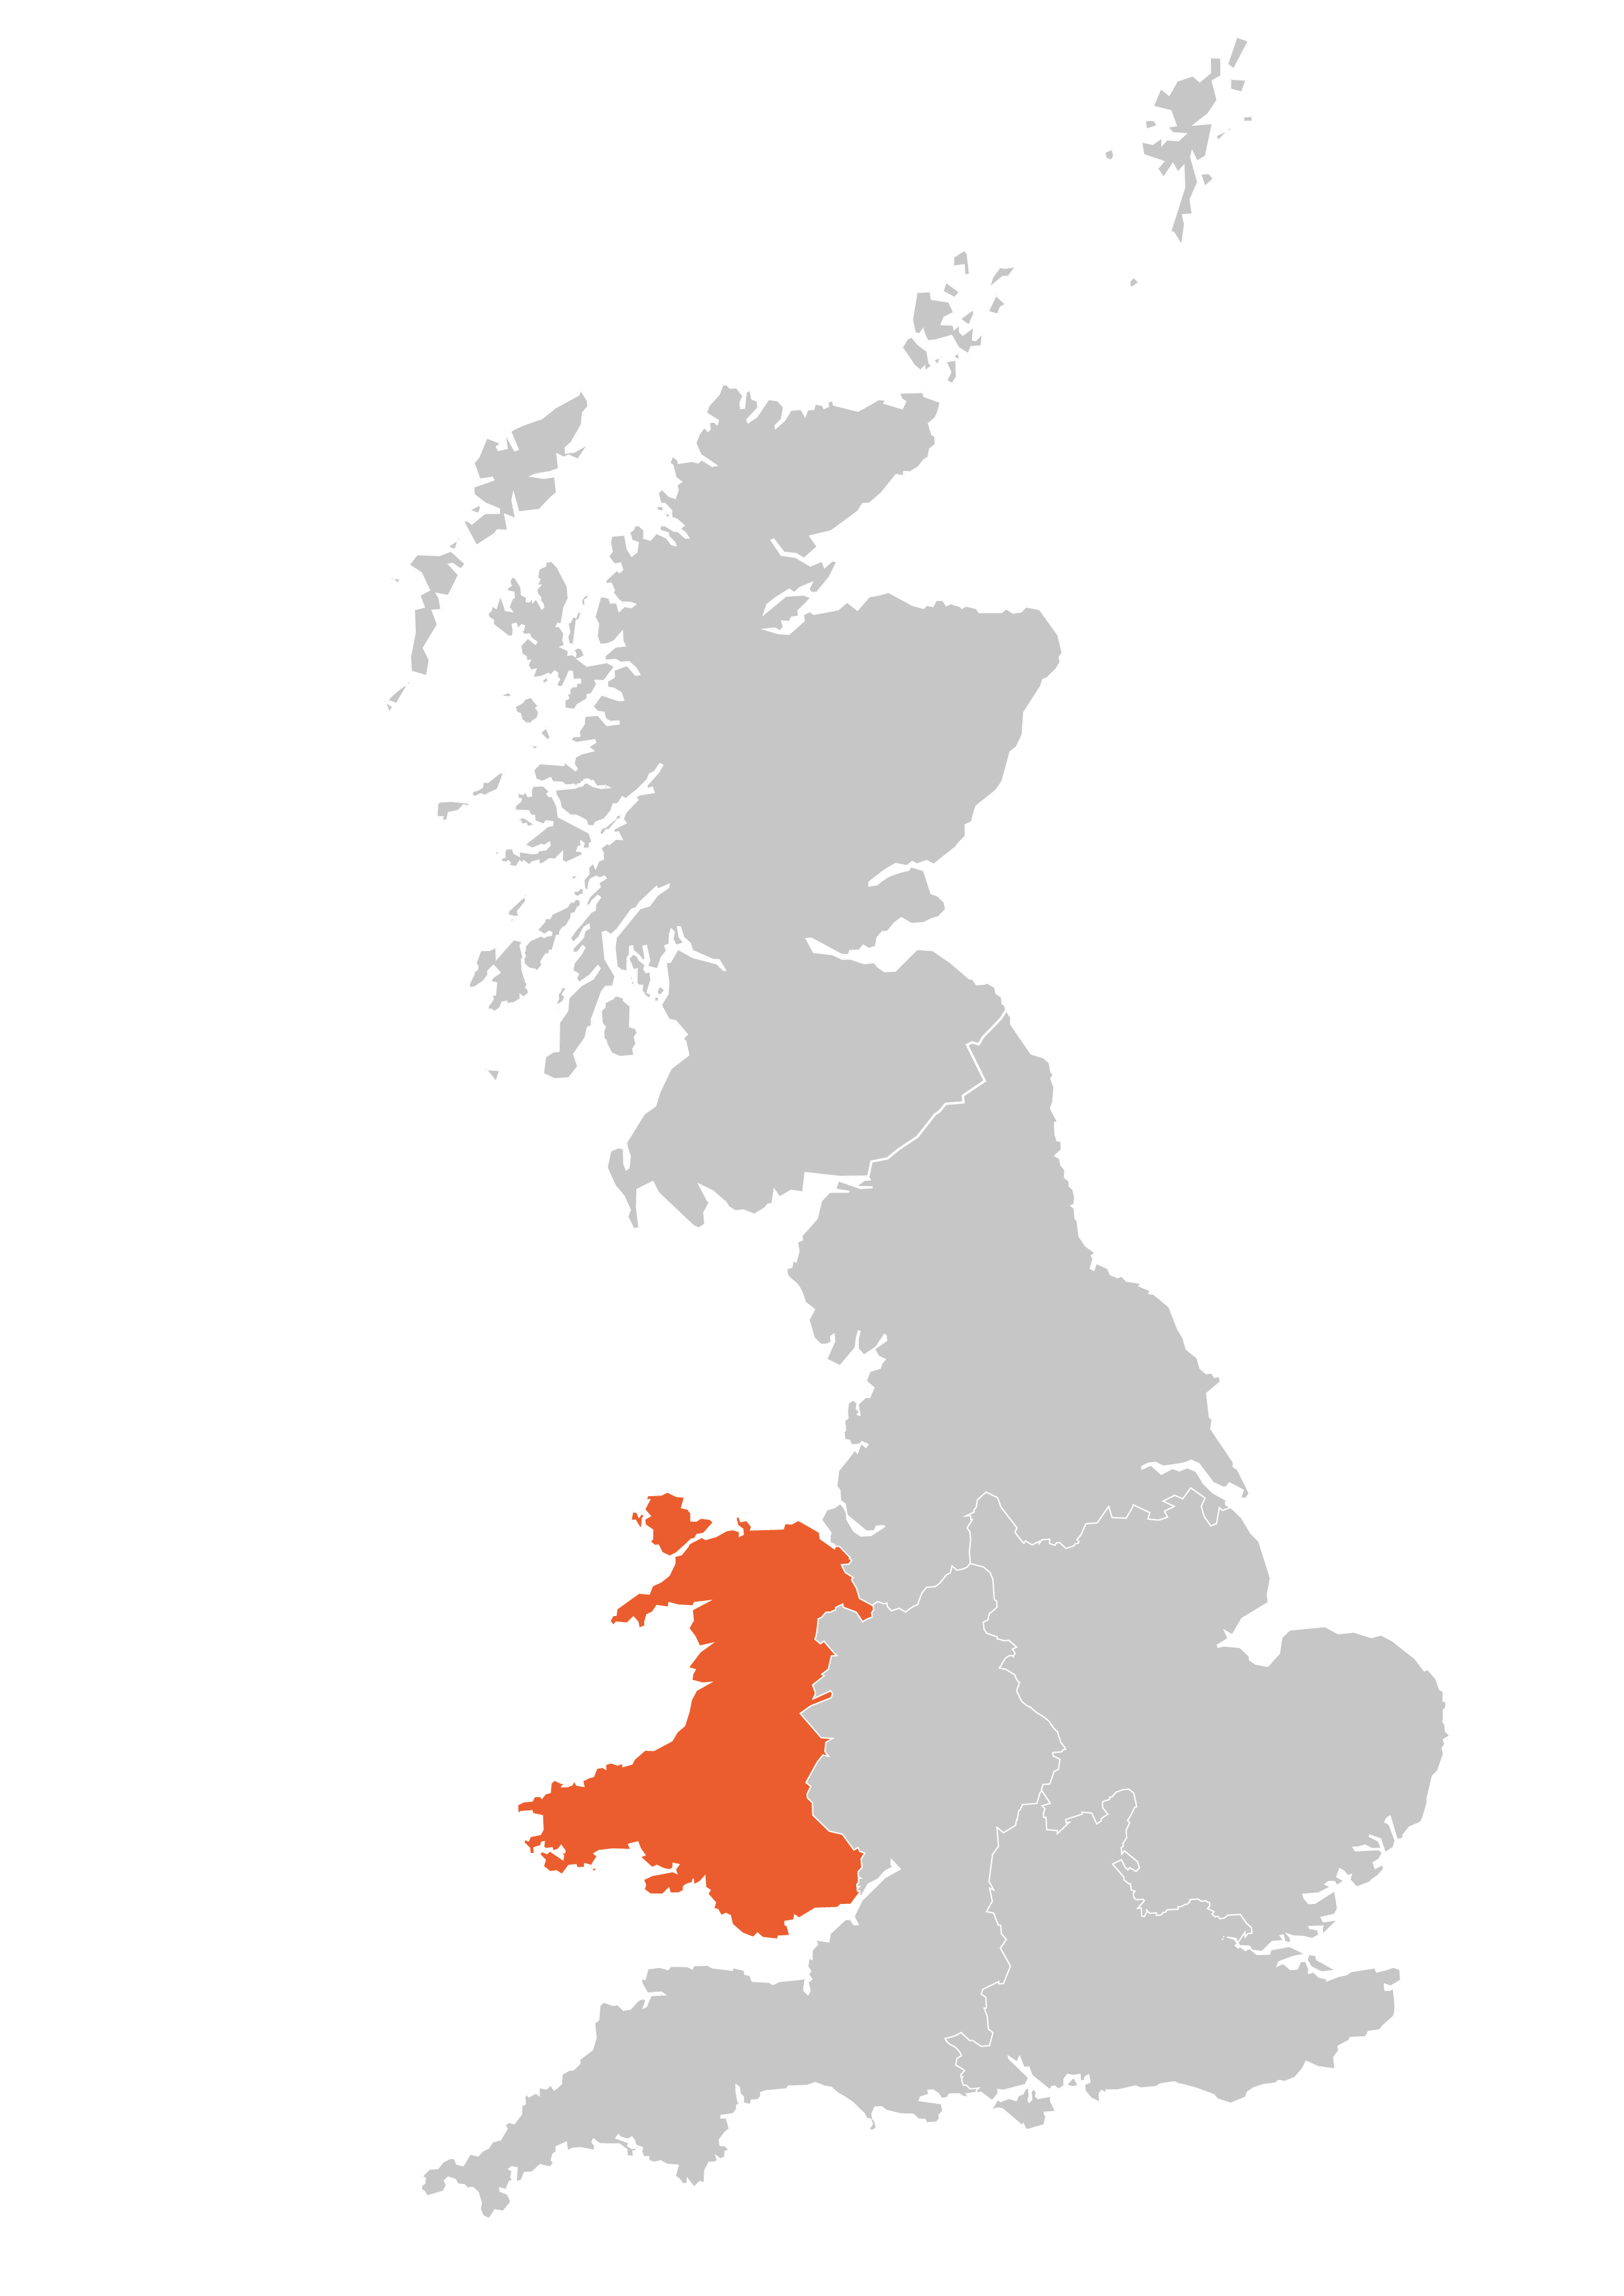 Map showing the funding areas for the Postcode Community Trust.